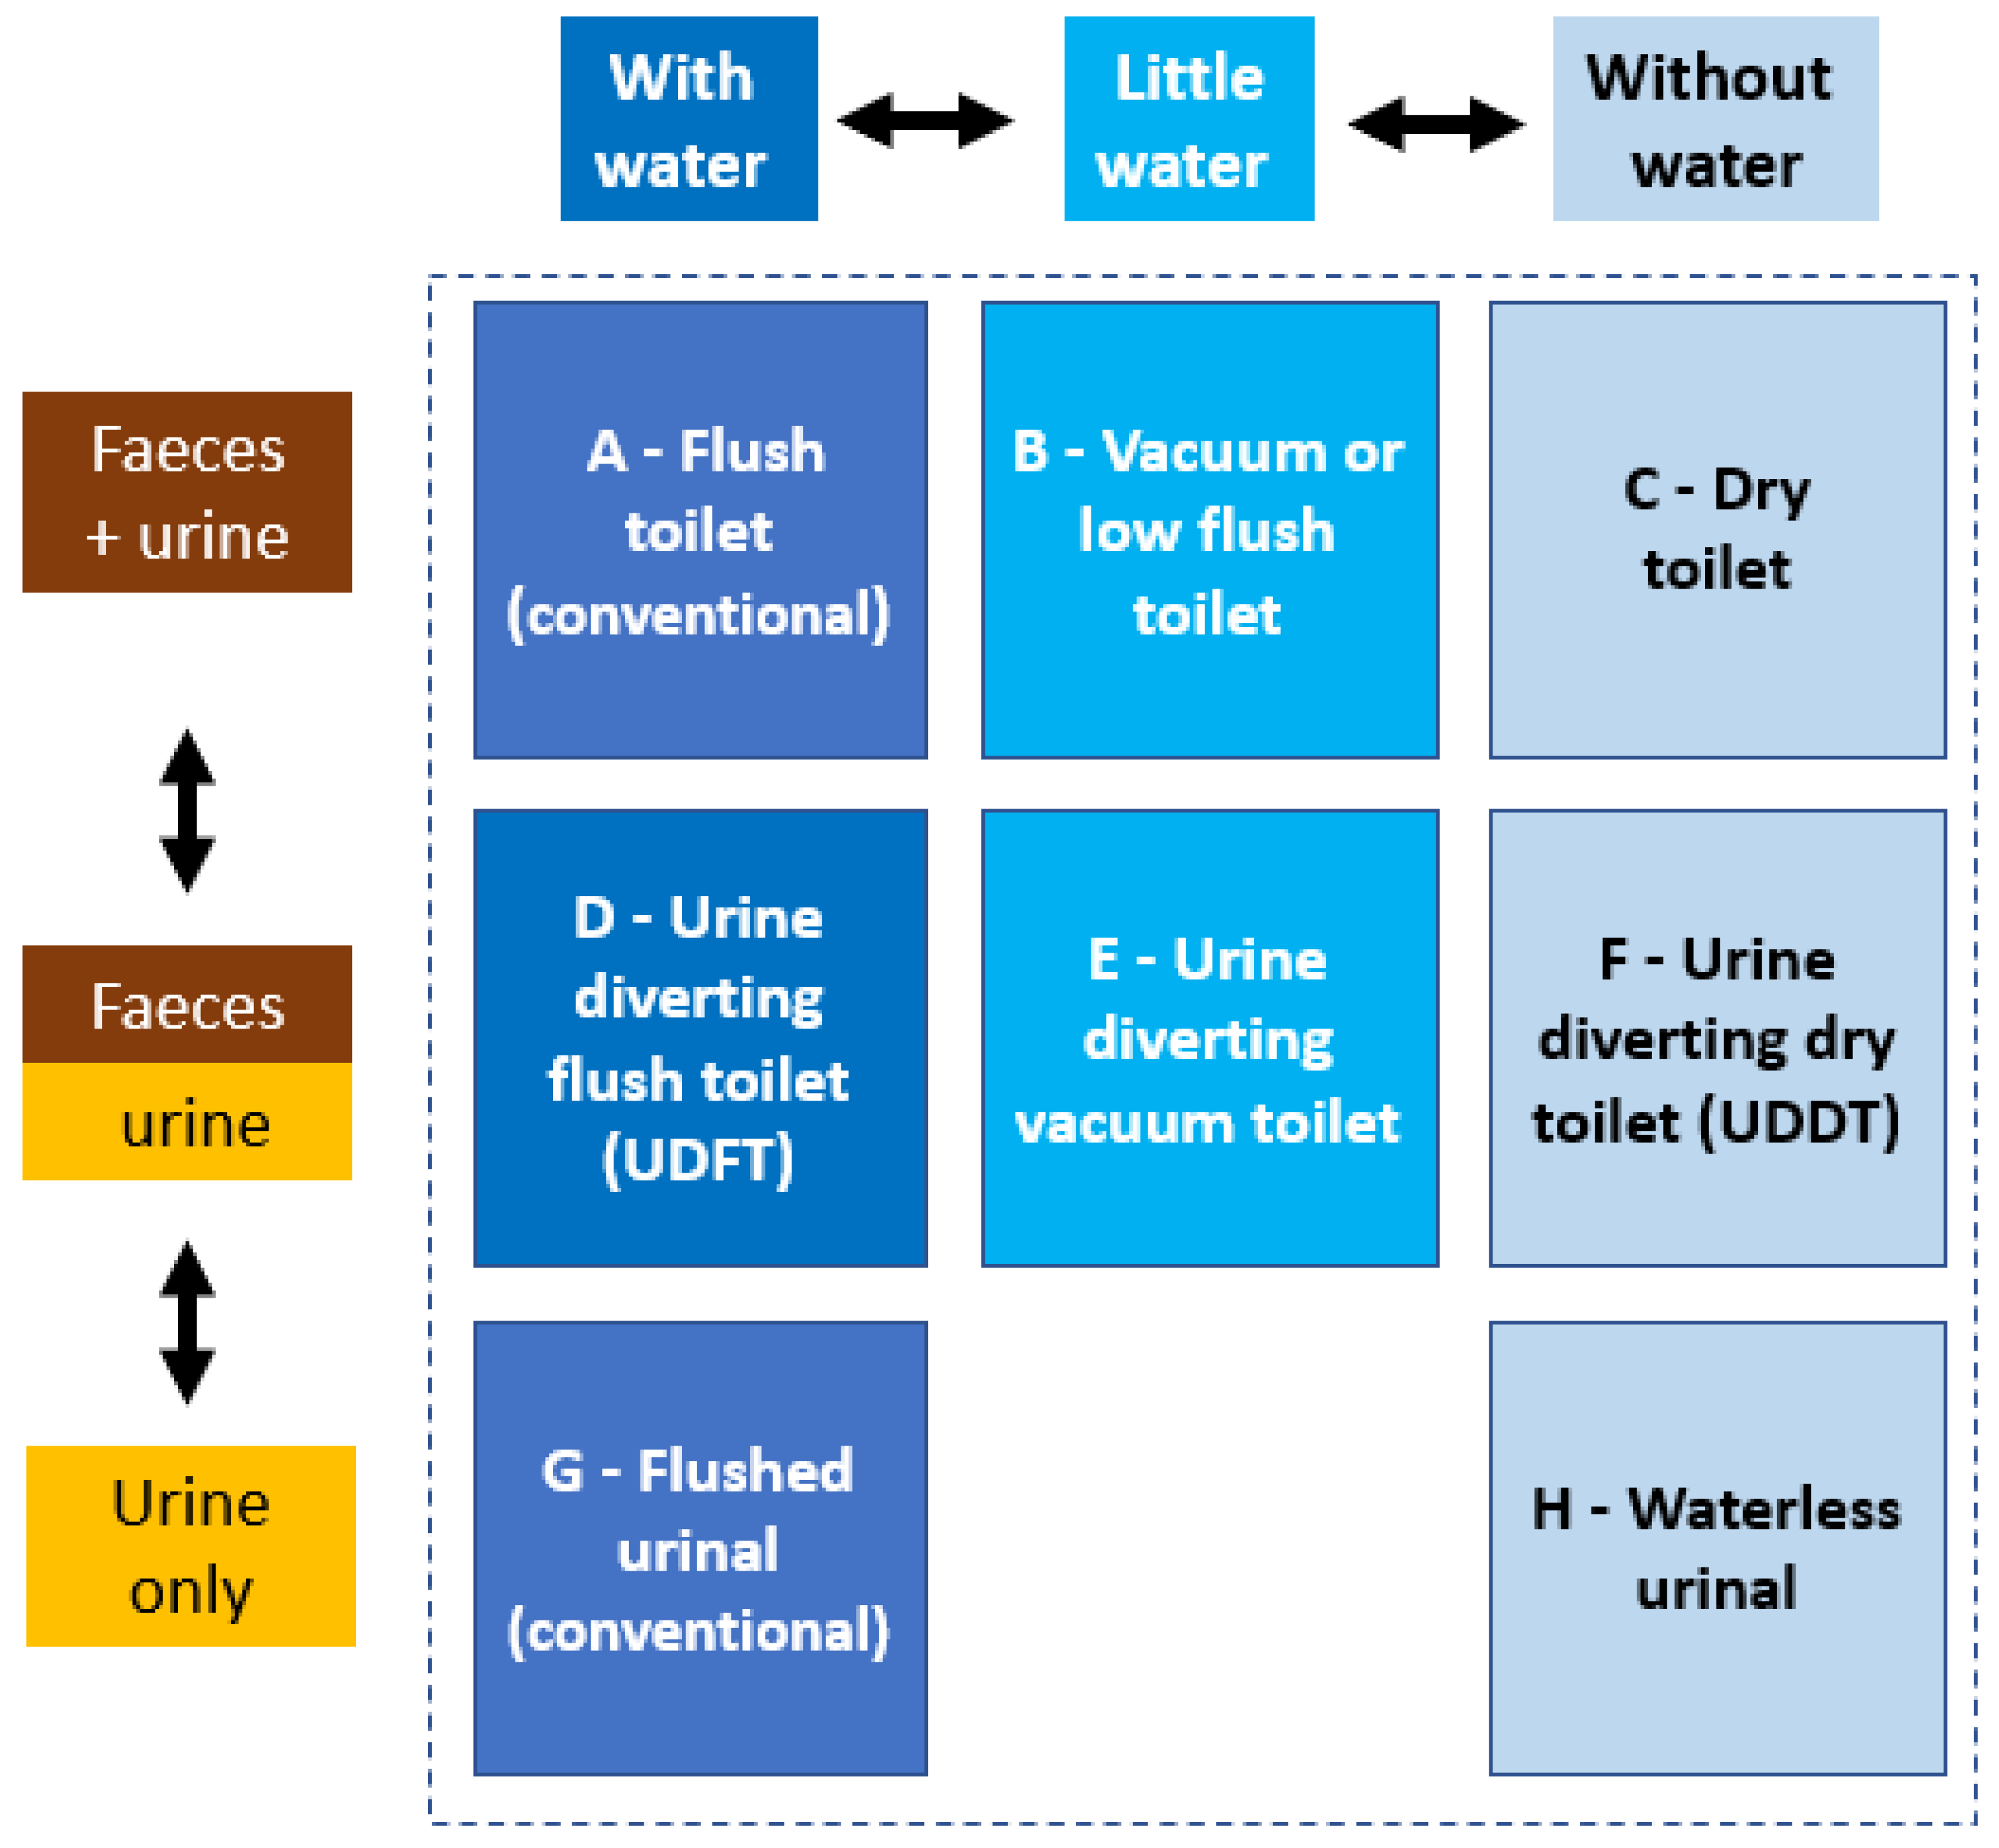 Water | Free Full-Text | Nature-Based Units as Building Blocks for Resource Systems in | HTML